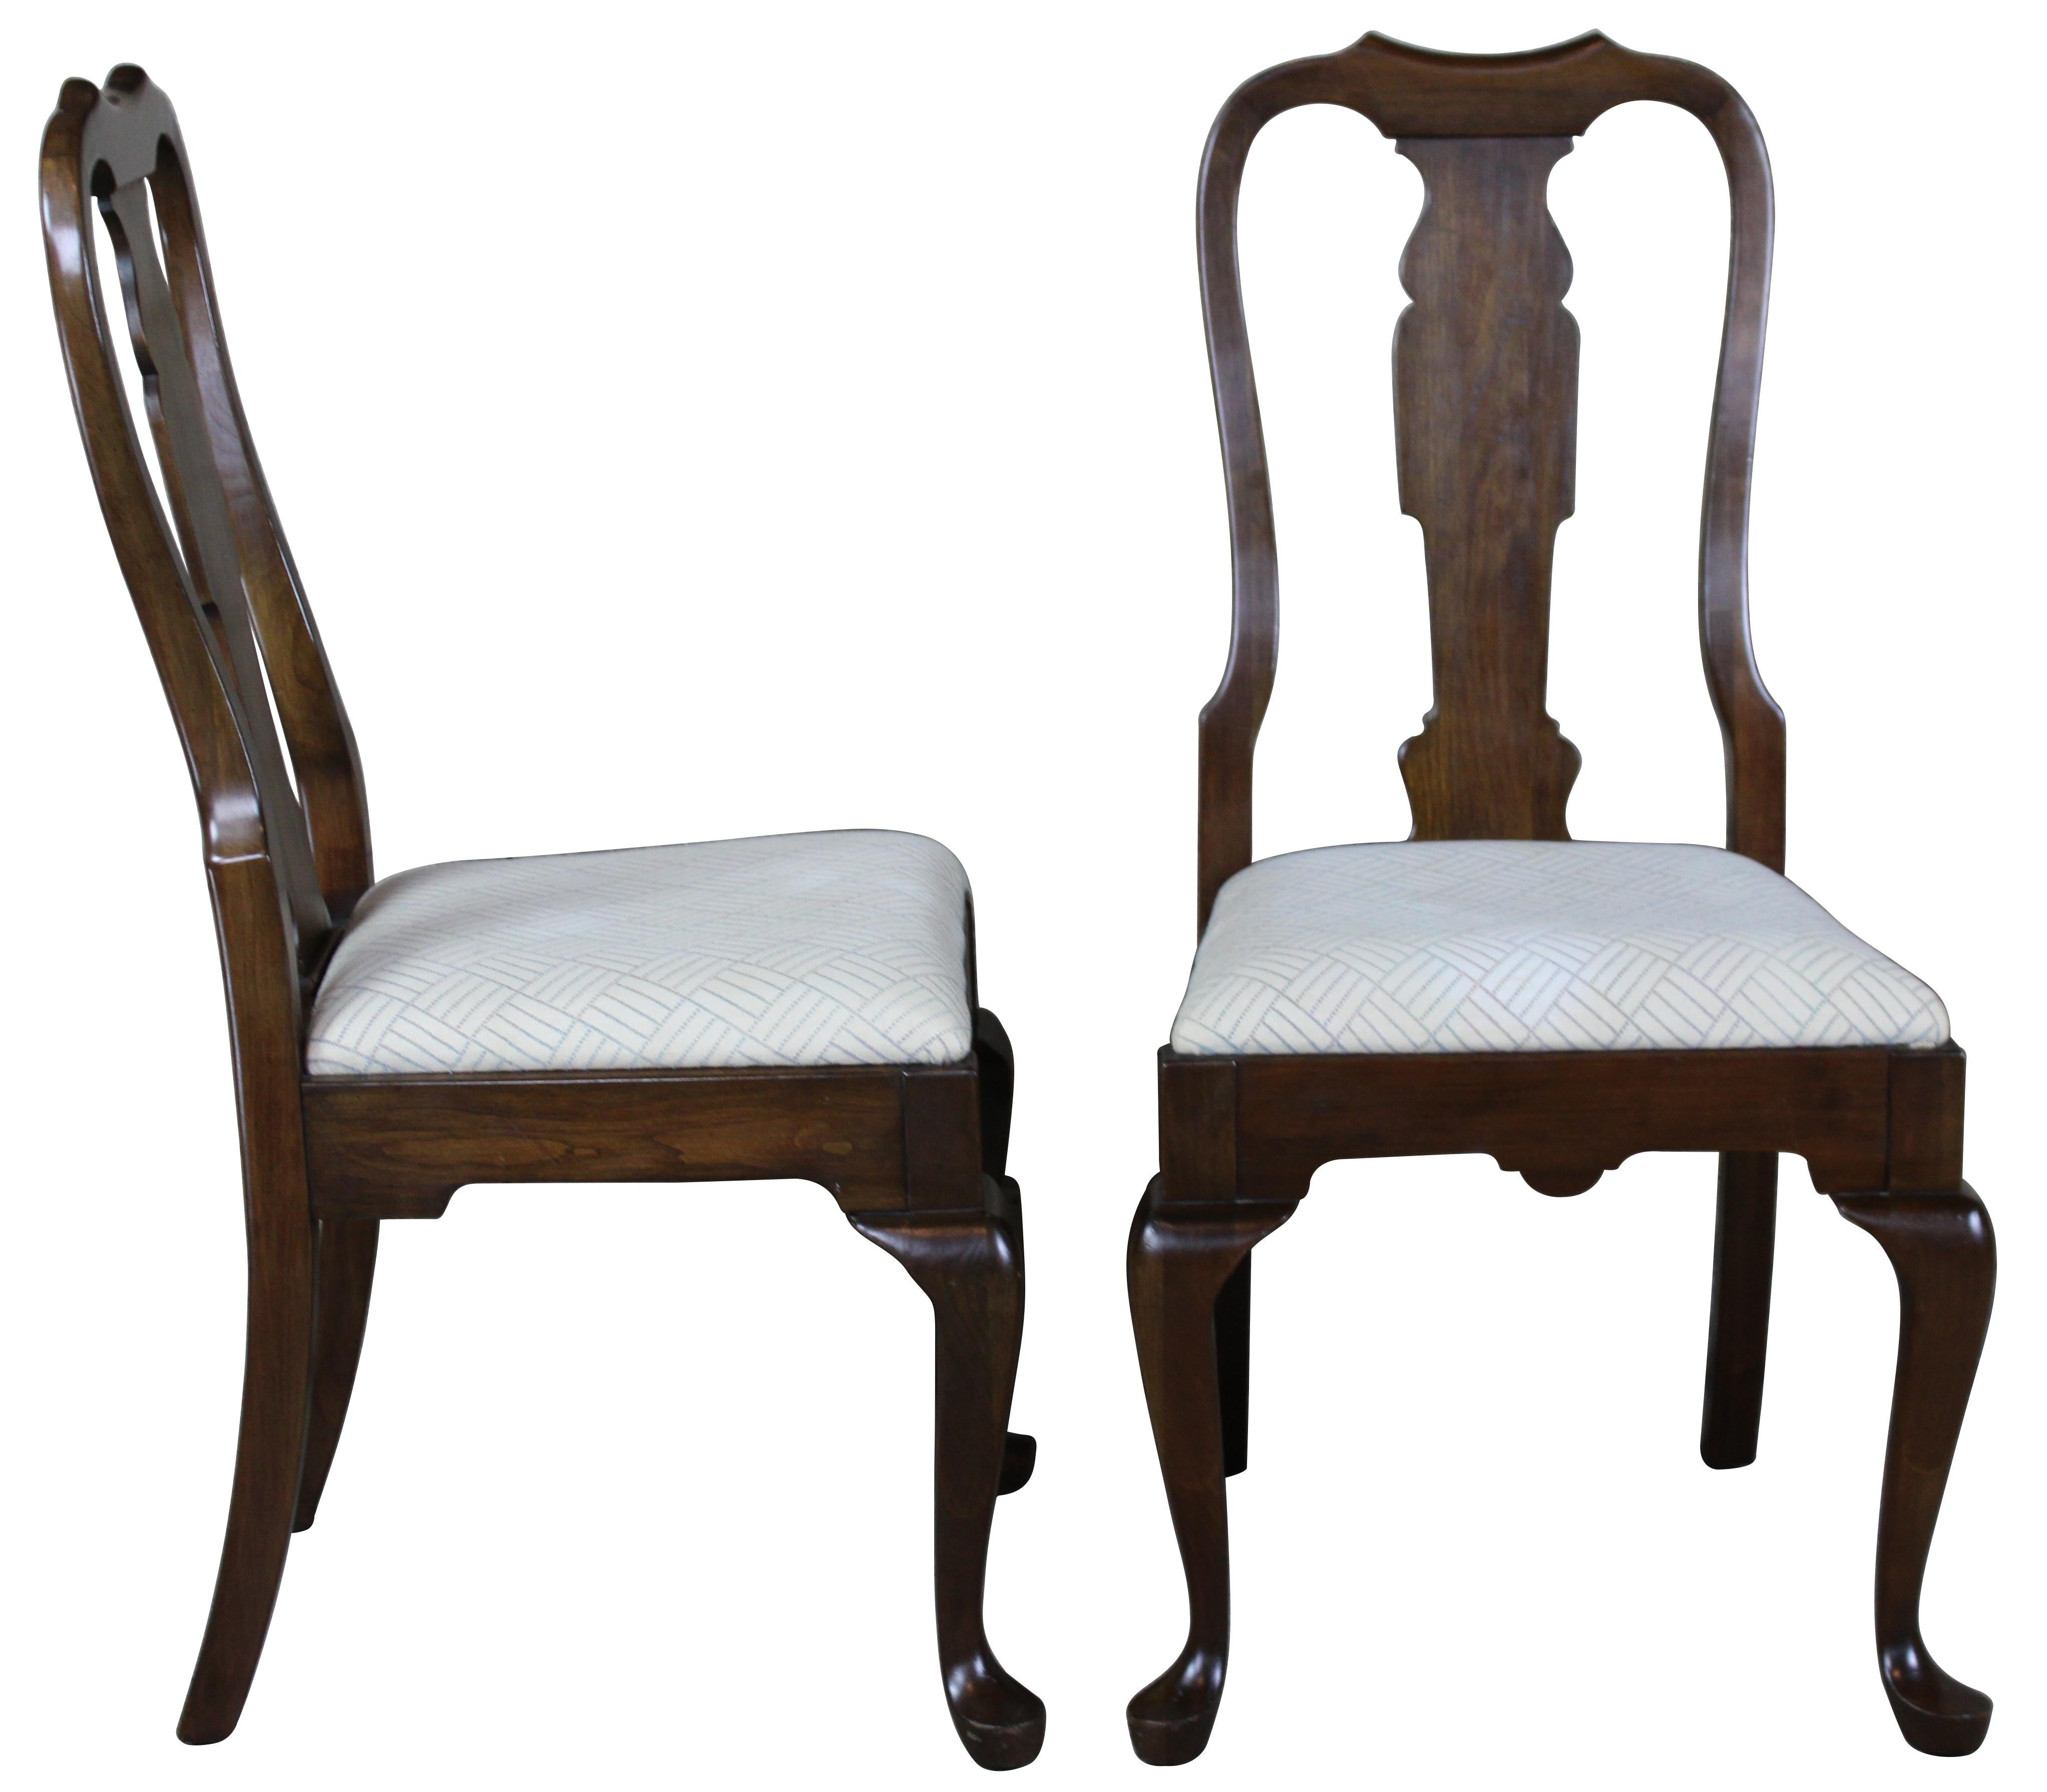 4 Pennsylvania House Independence hall dining chairs, circa 1978. Made from solid cherry in Queen Anne styling. Features a curved upper rail over vase shaped splat and cabriole legs. Upholstered in whit with grey geometric design. 11-3109.
  